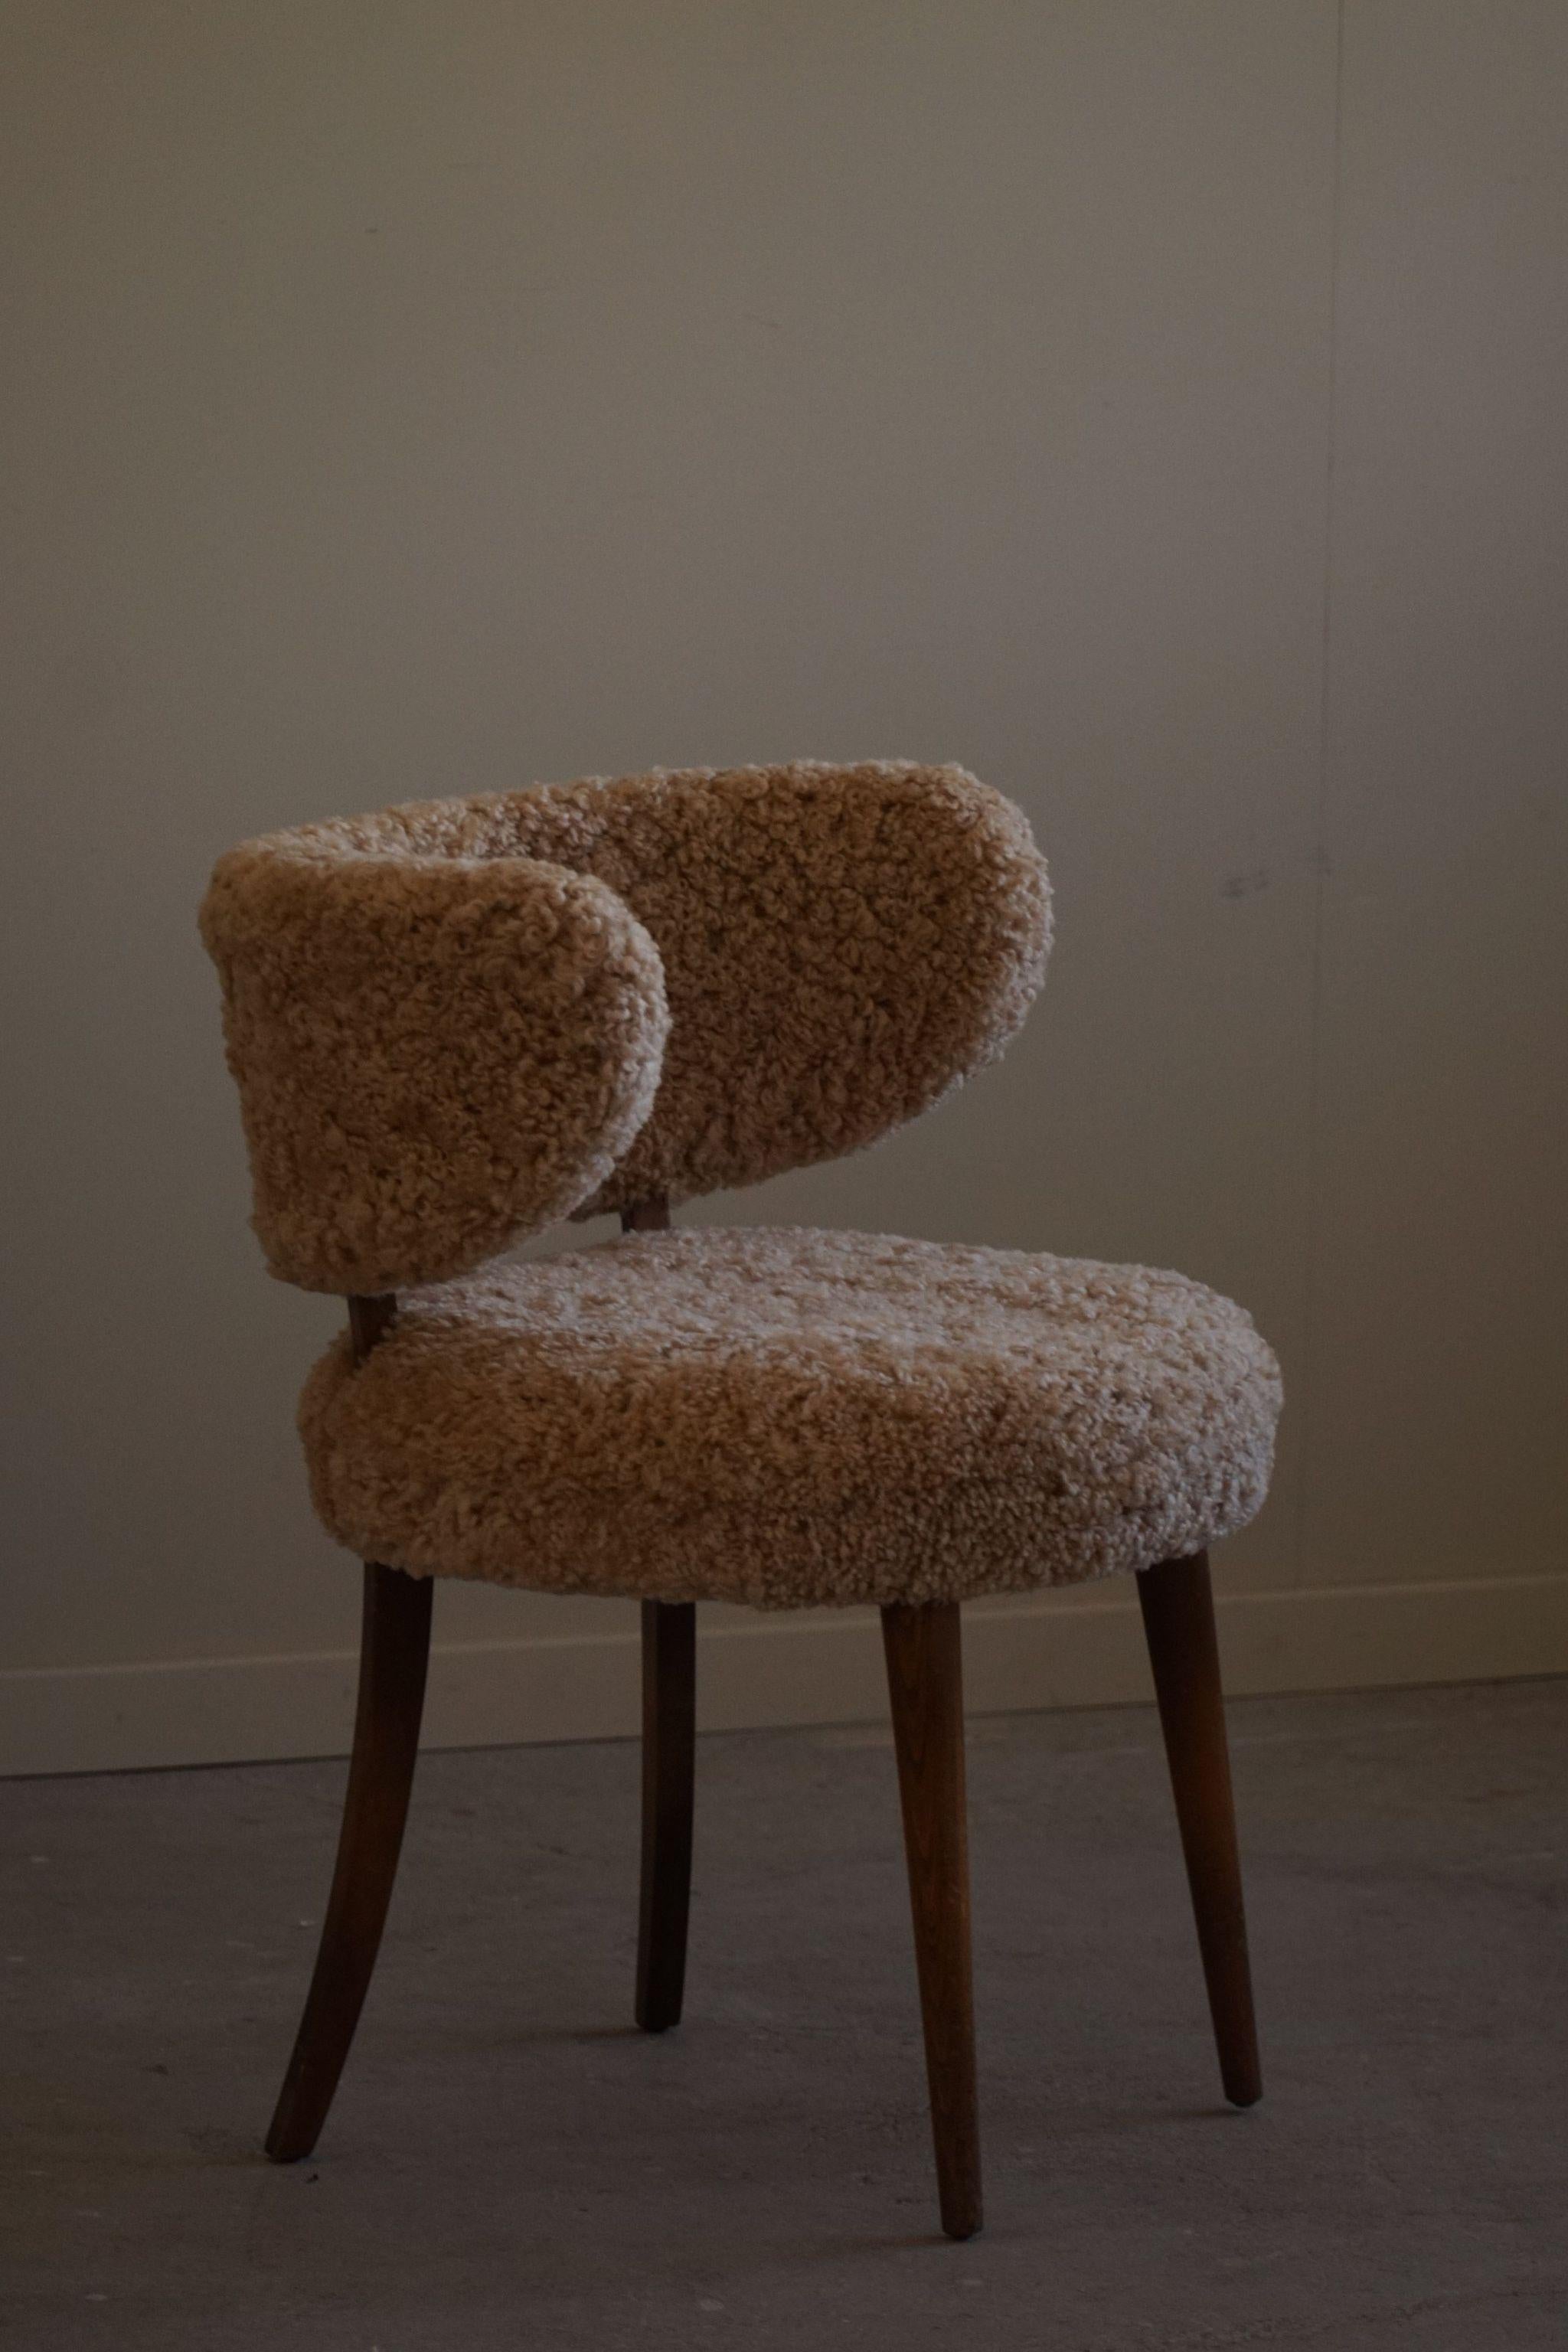 20th Century An Elegant Danish Modern Low Back Chair, Reupholstered in Lambswool, 1940s For Sale